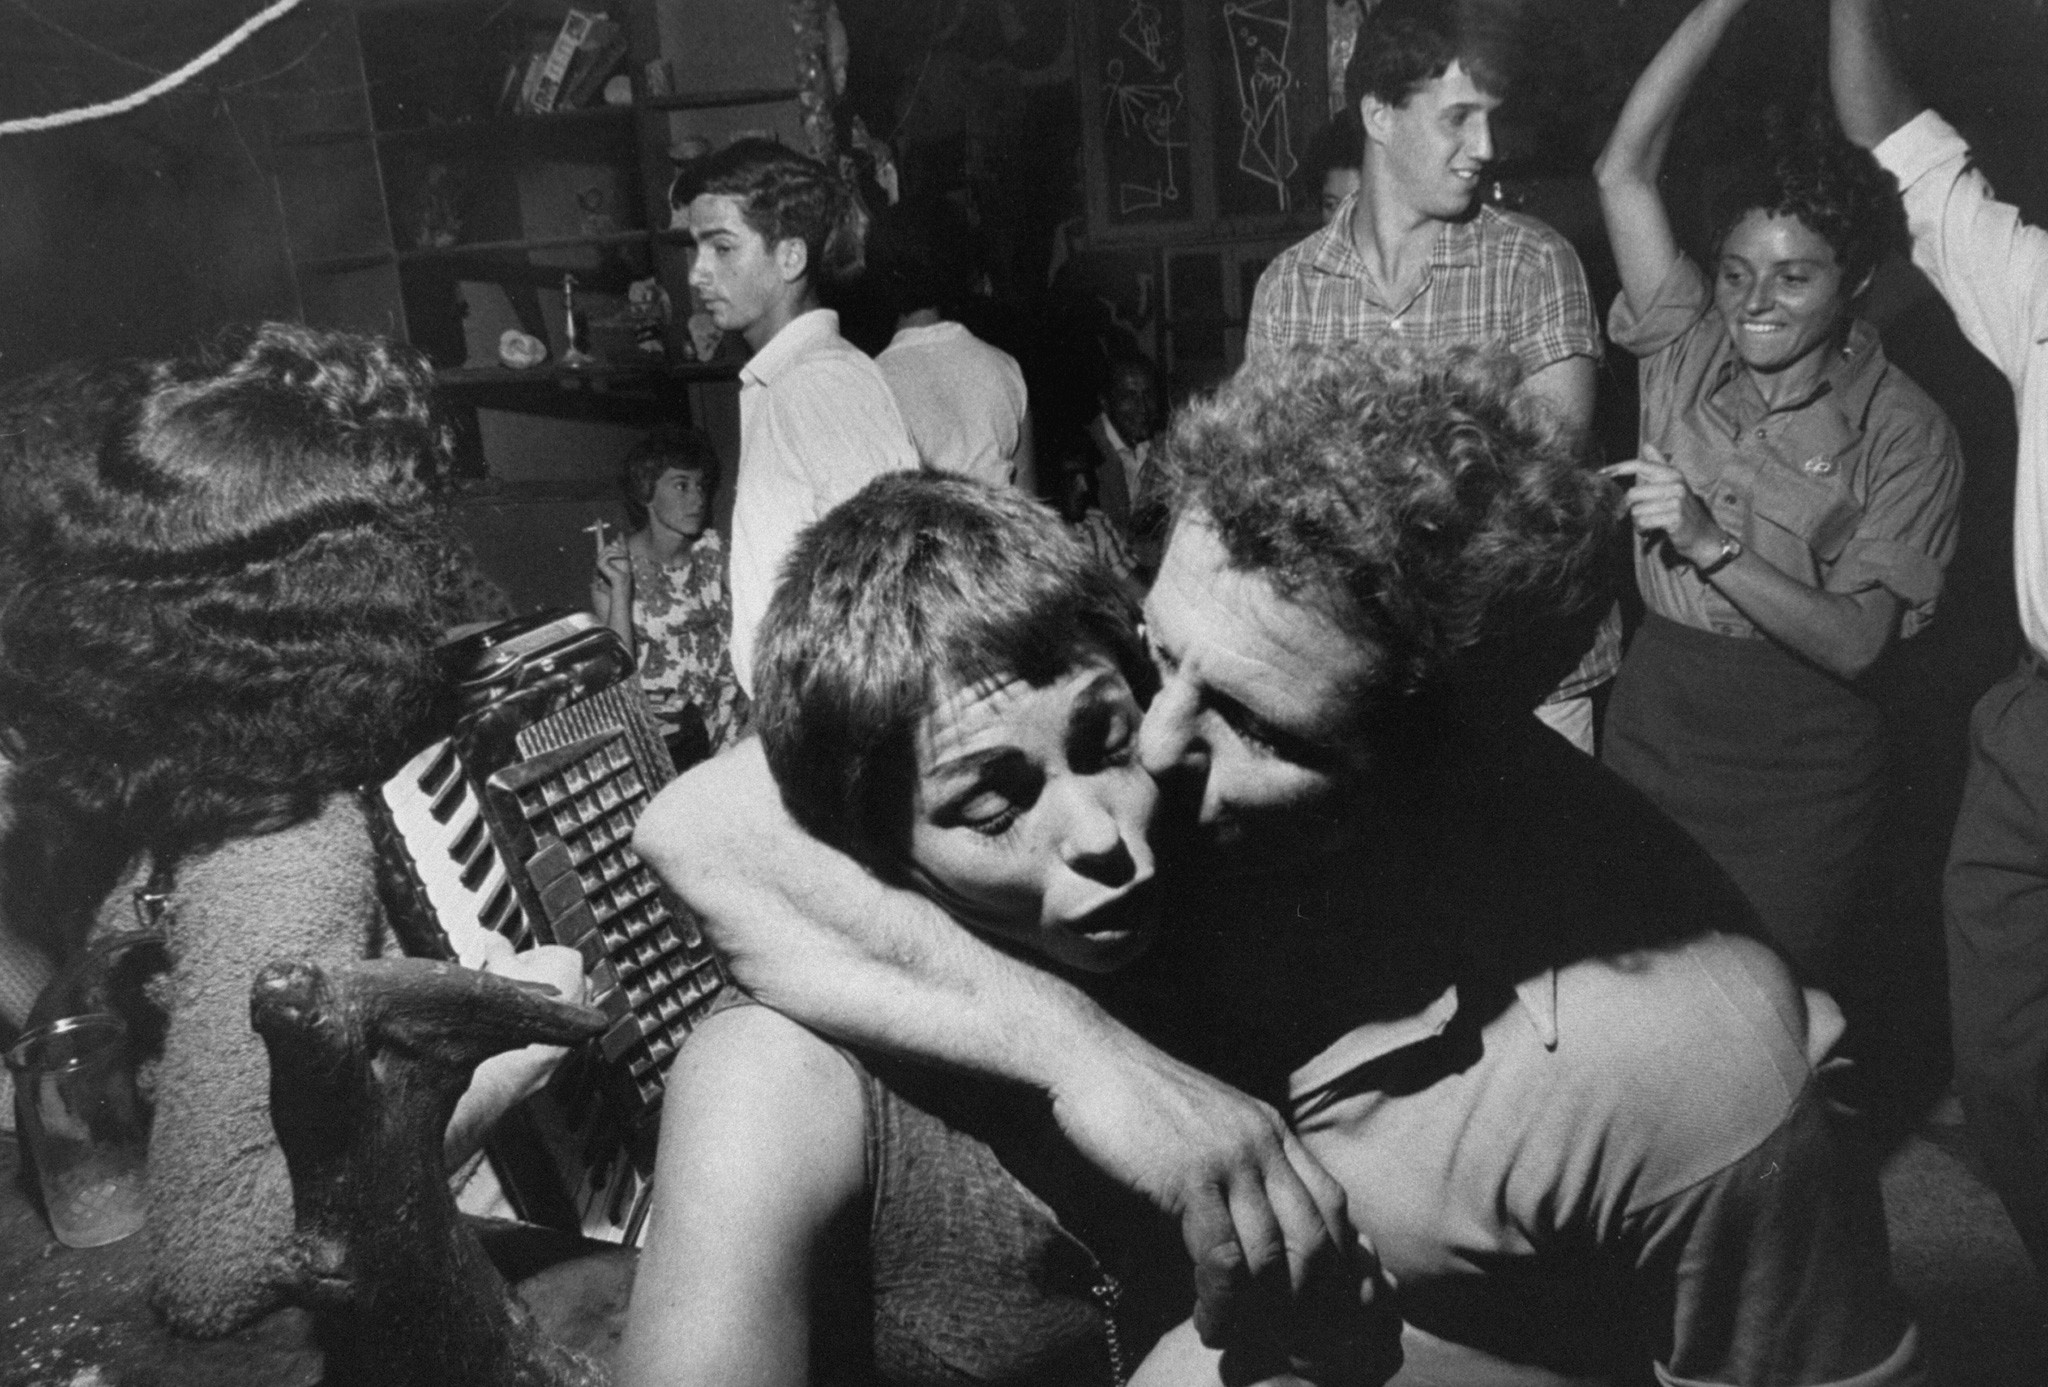 Israelis dance at the "Last Chance Cafe", a night club in Beersheba, Israel, May 1960.